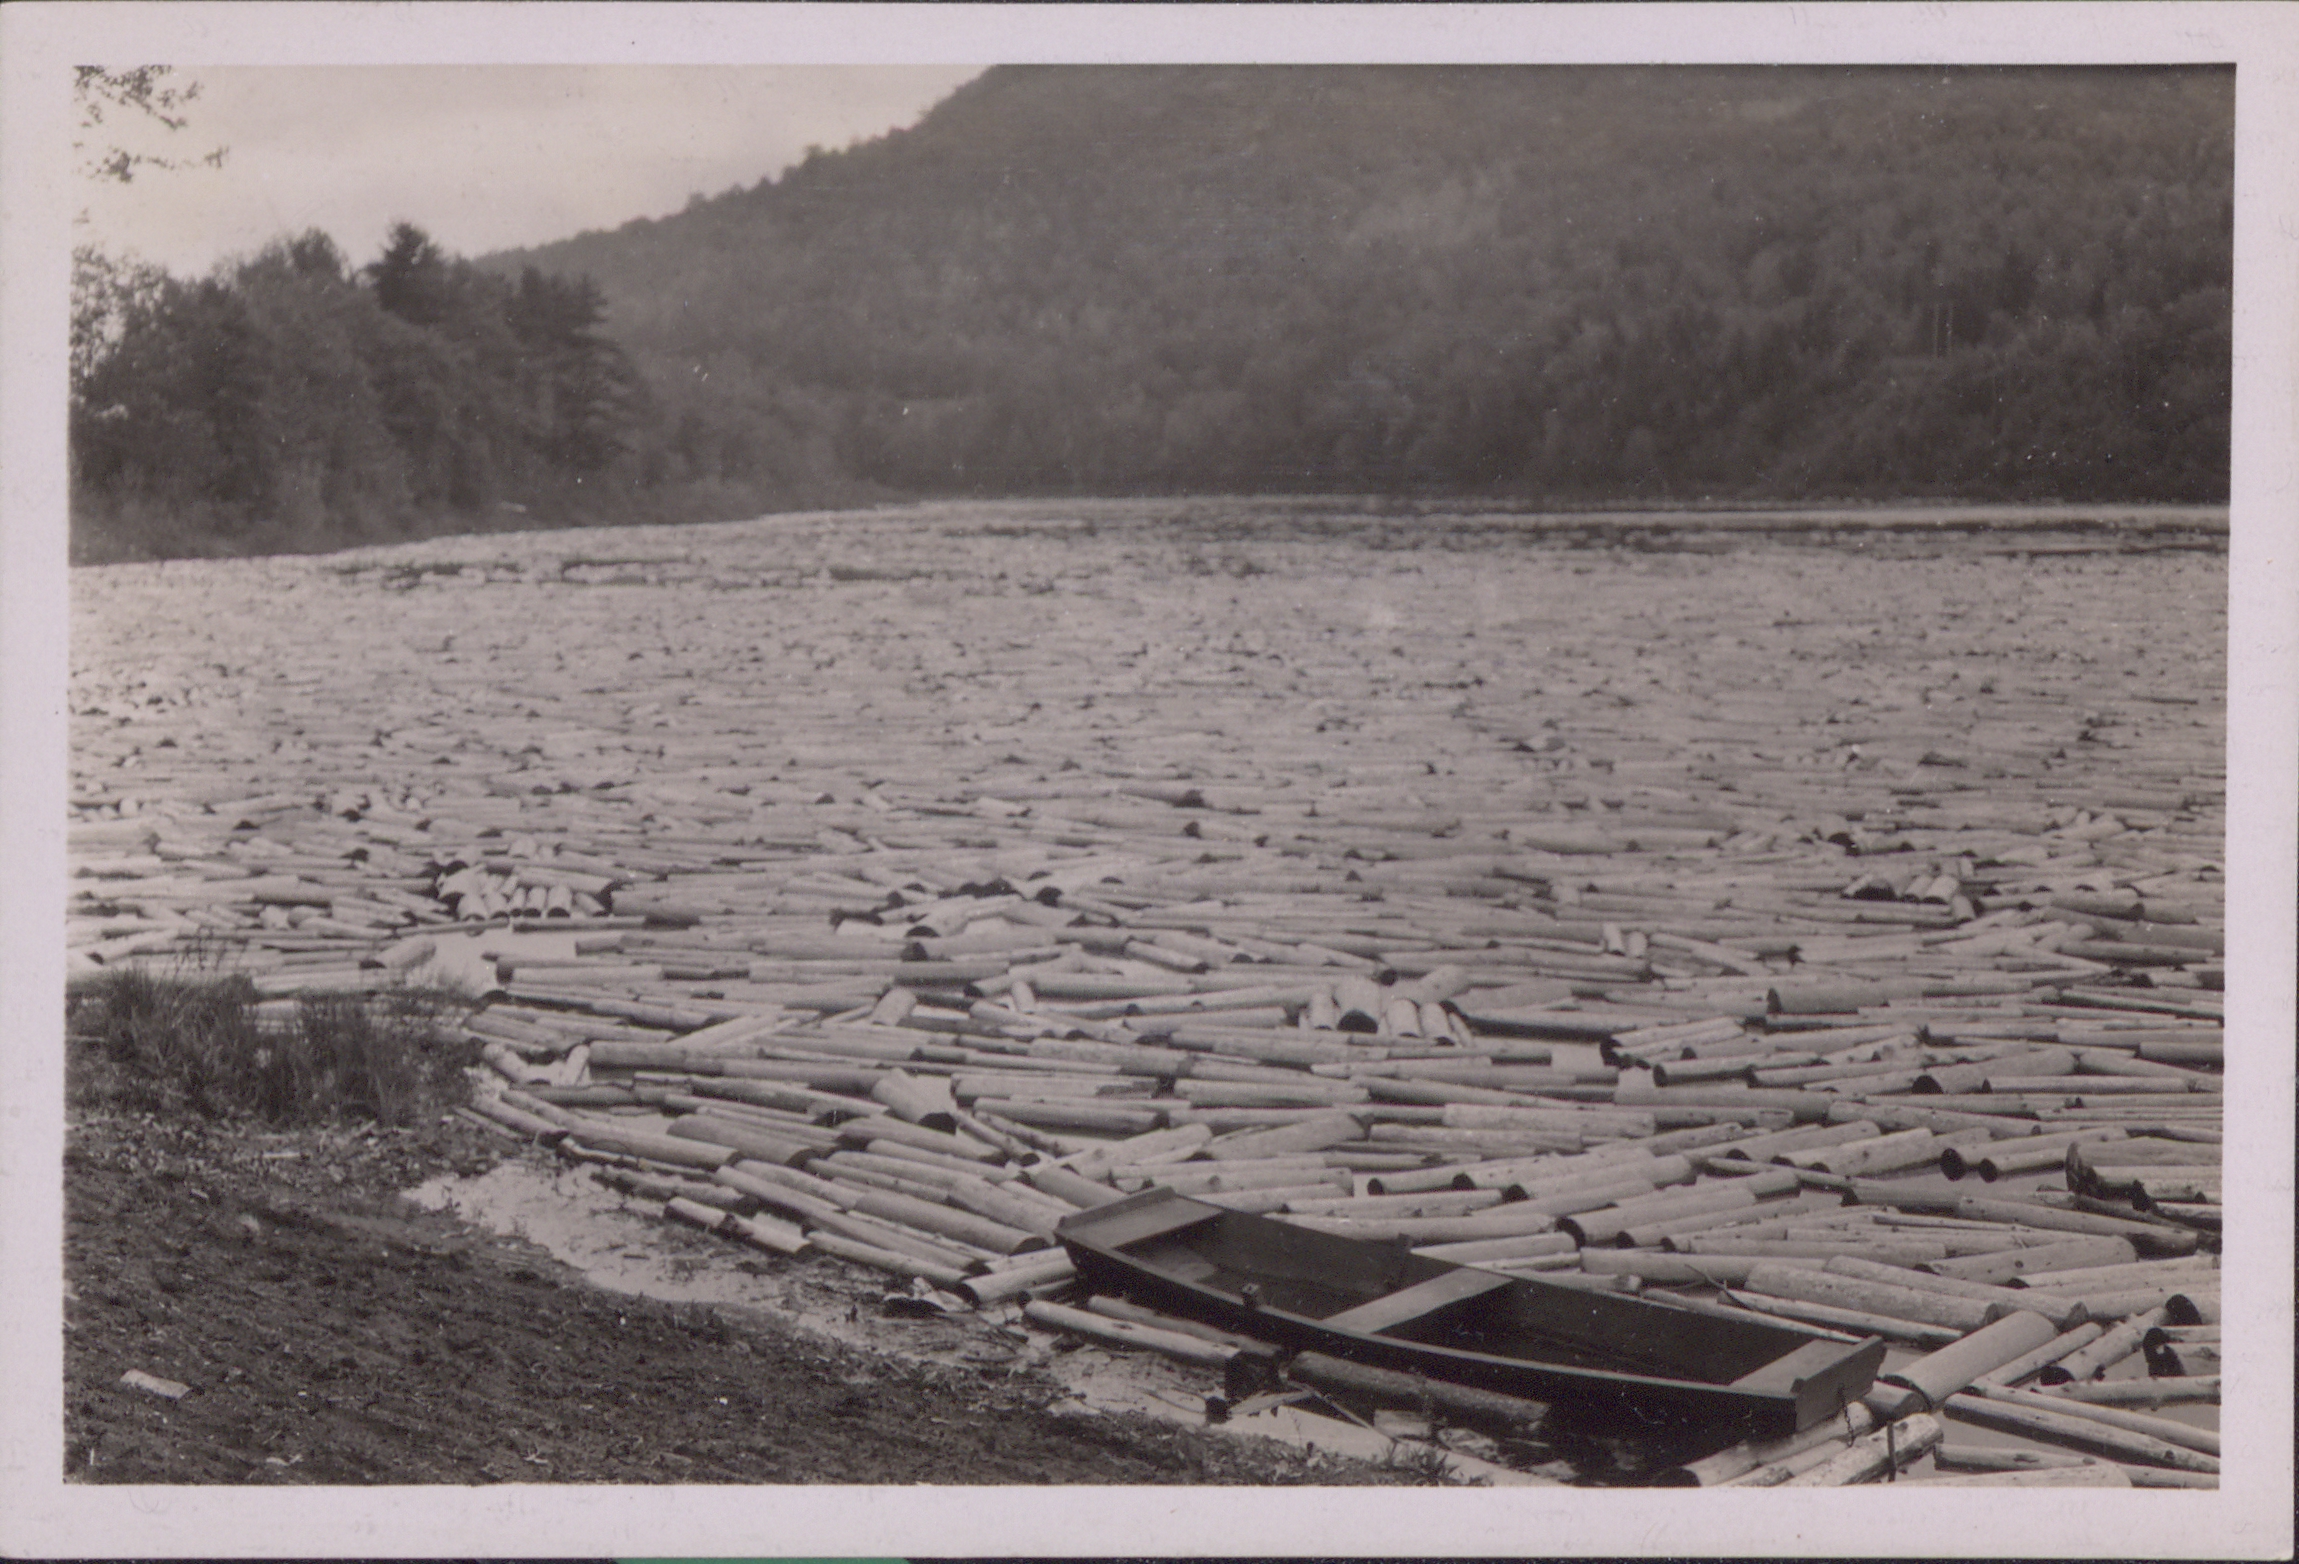 Pulpwood logs almost completely covering the surface of the Hudson River as they float near Lake Luzerne, NY. An empty boat is hemmed in by the logs along the shore, May 24, 1931. 